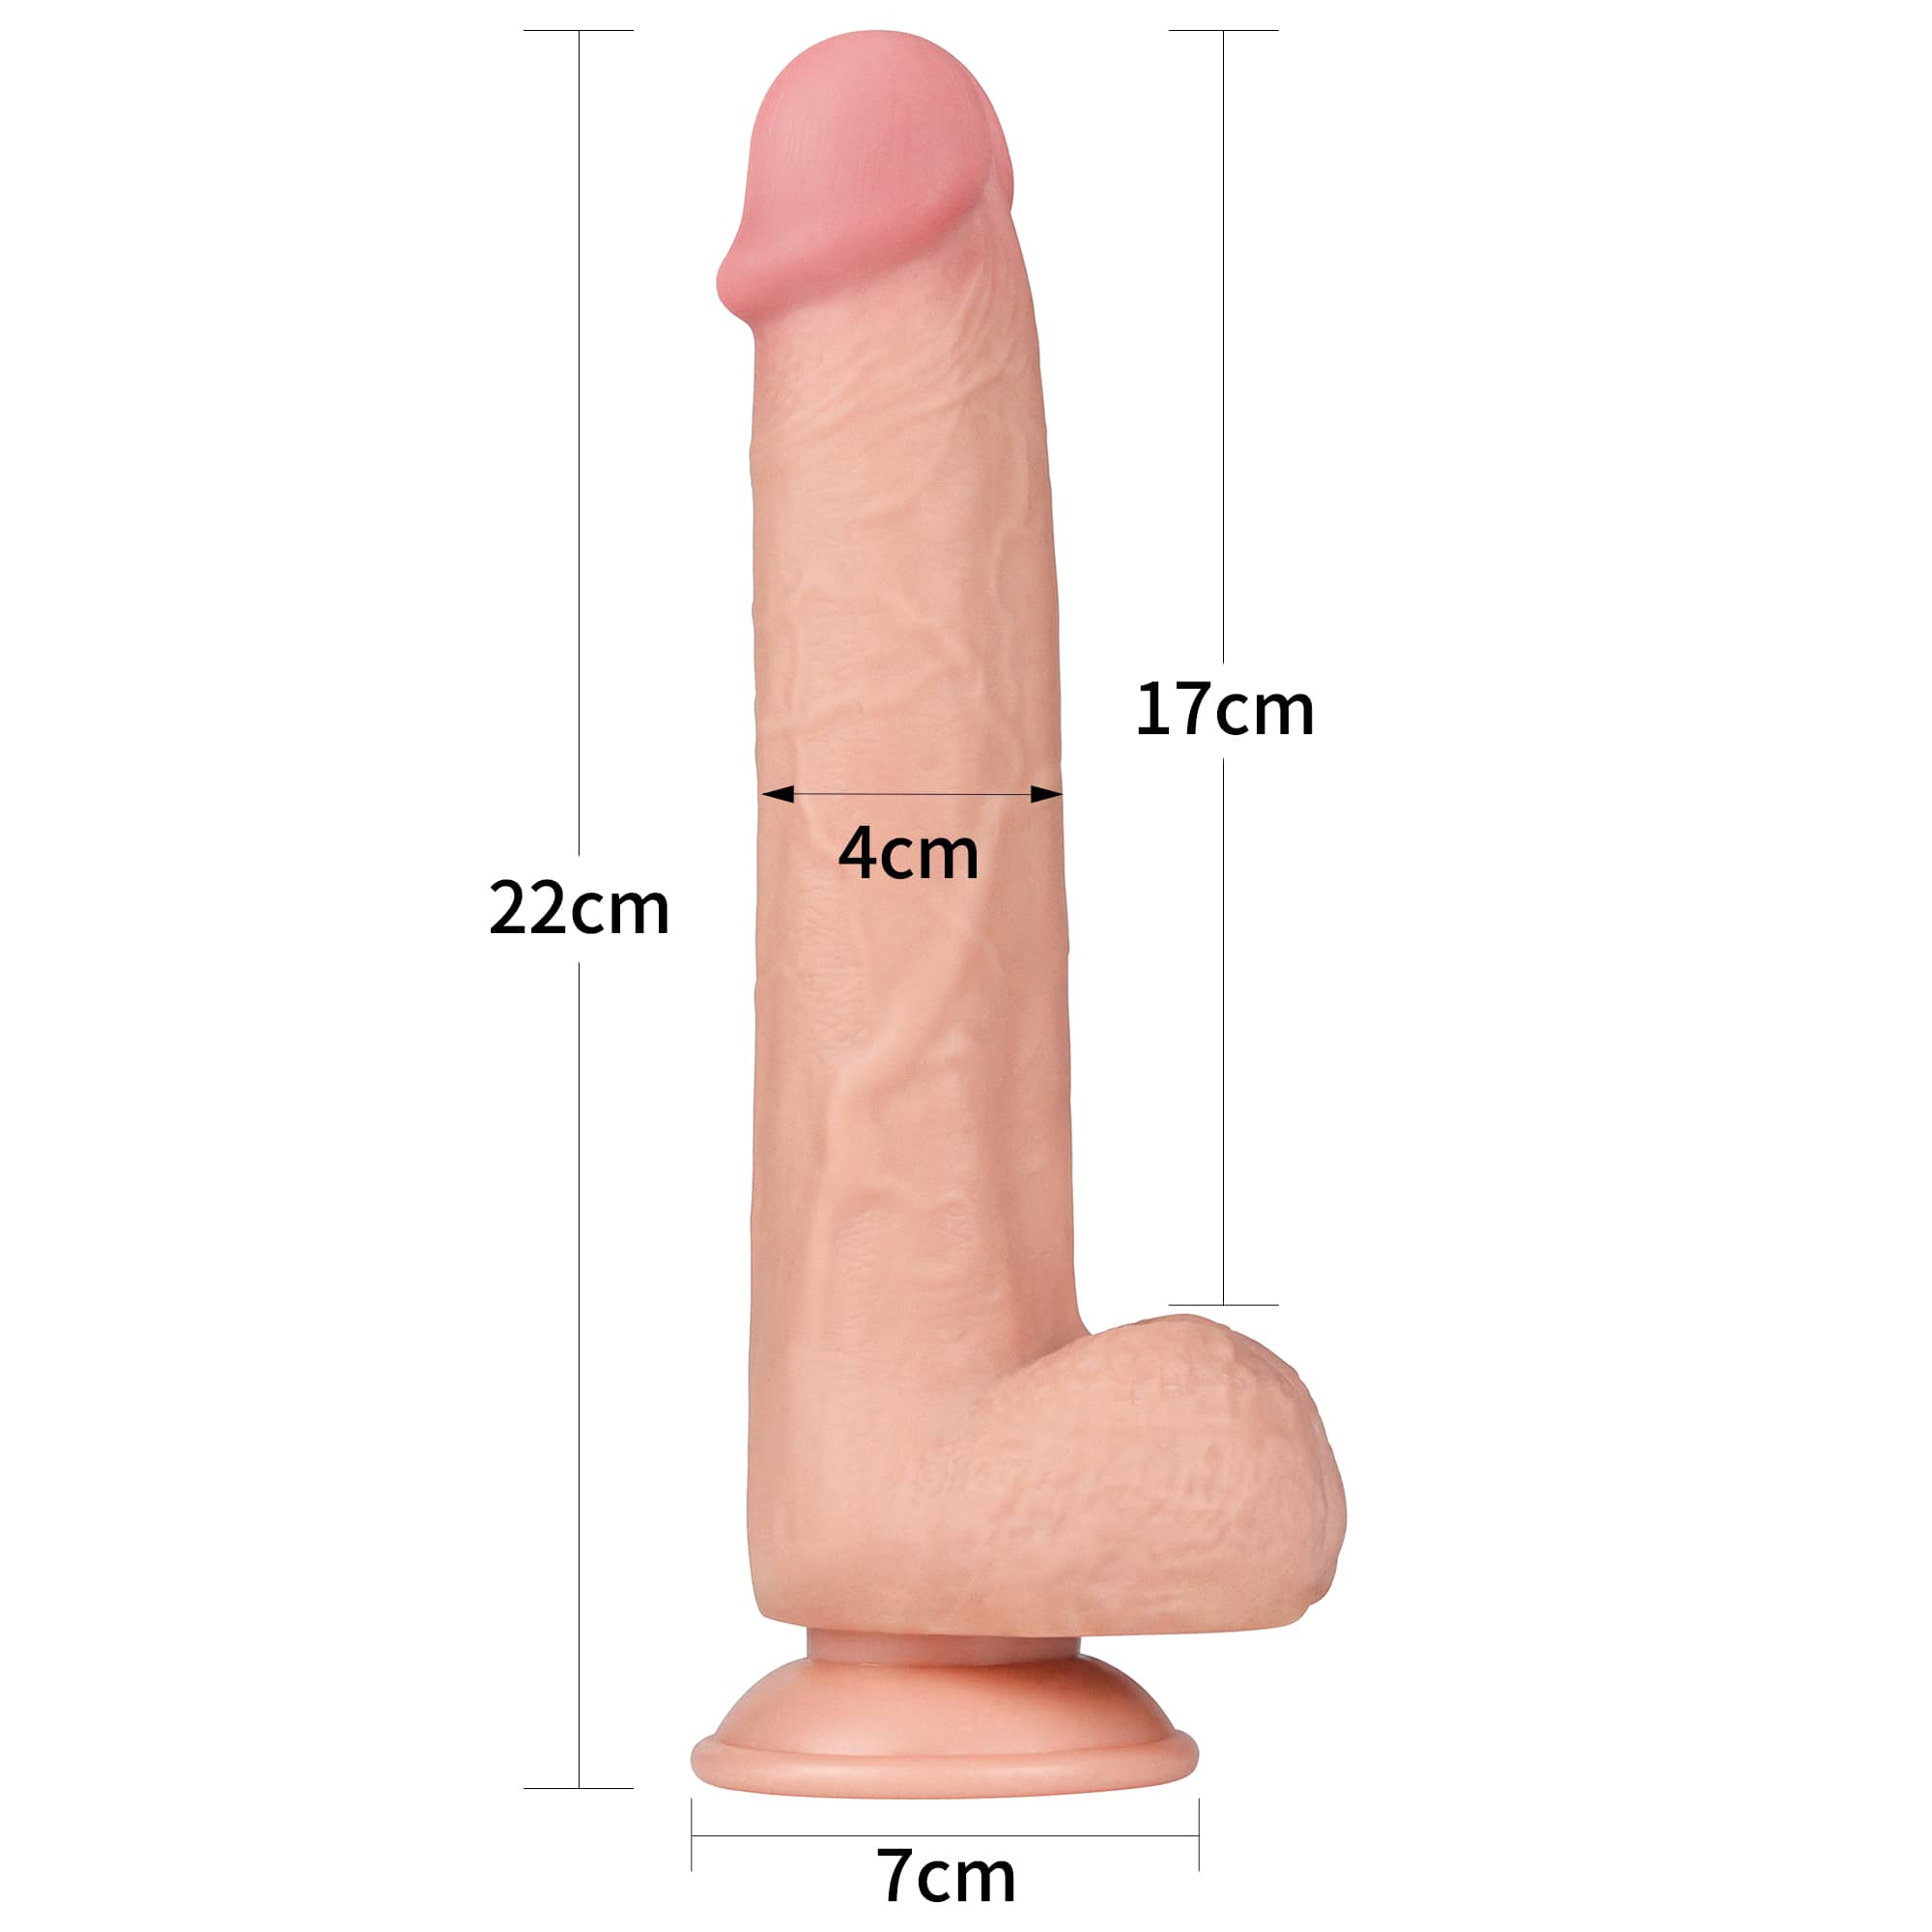 The size of the 9 inches realistic sliding skin suction cup dildo